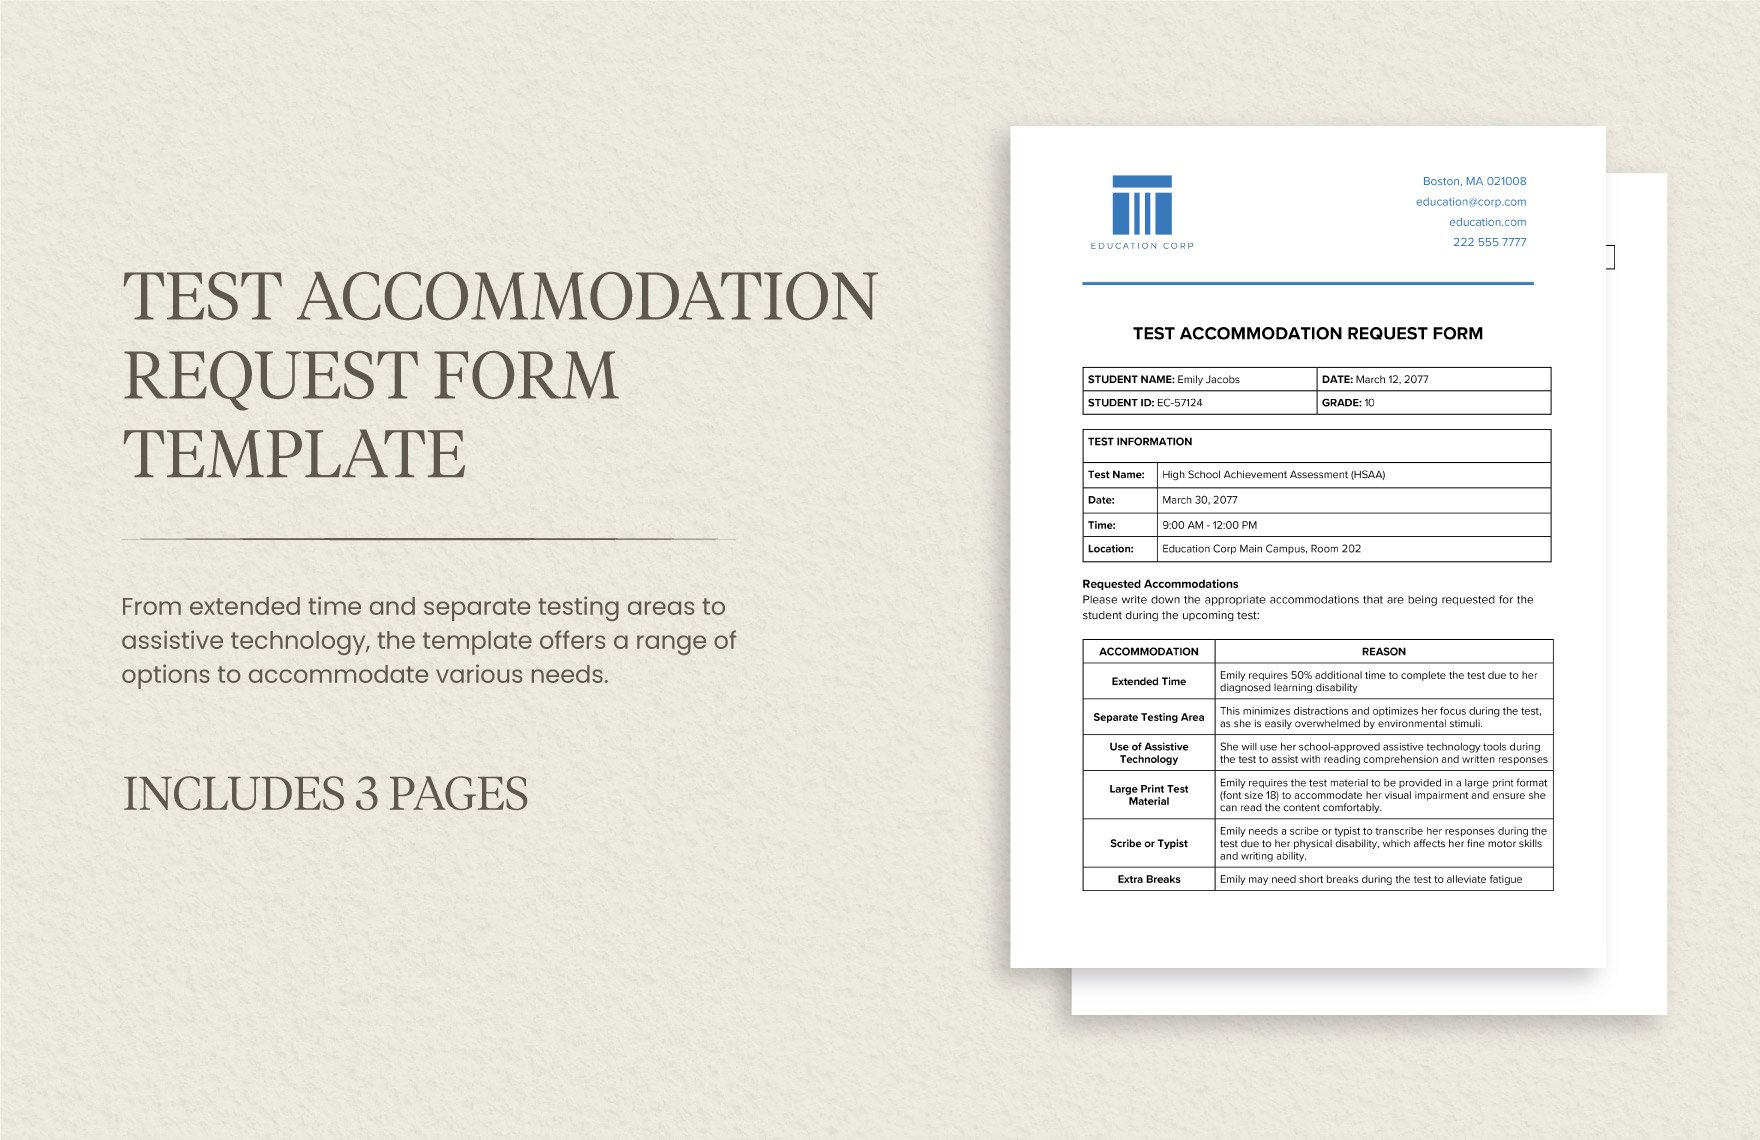 Test Accommodation Request Form Template in Word, Google Docs, PDF